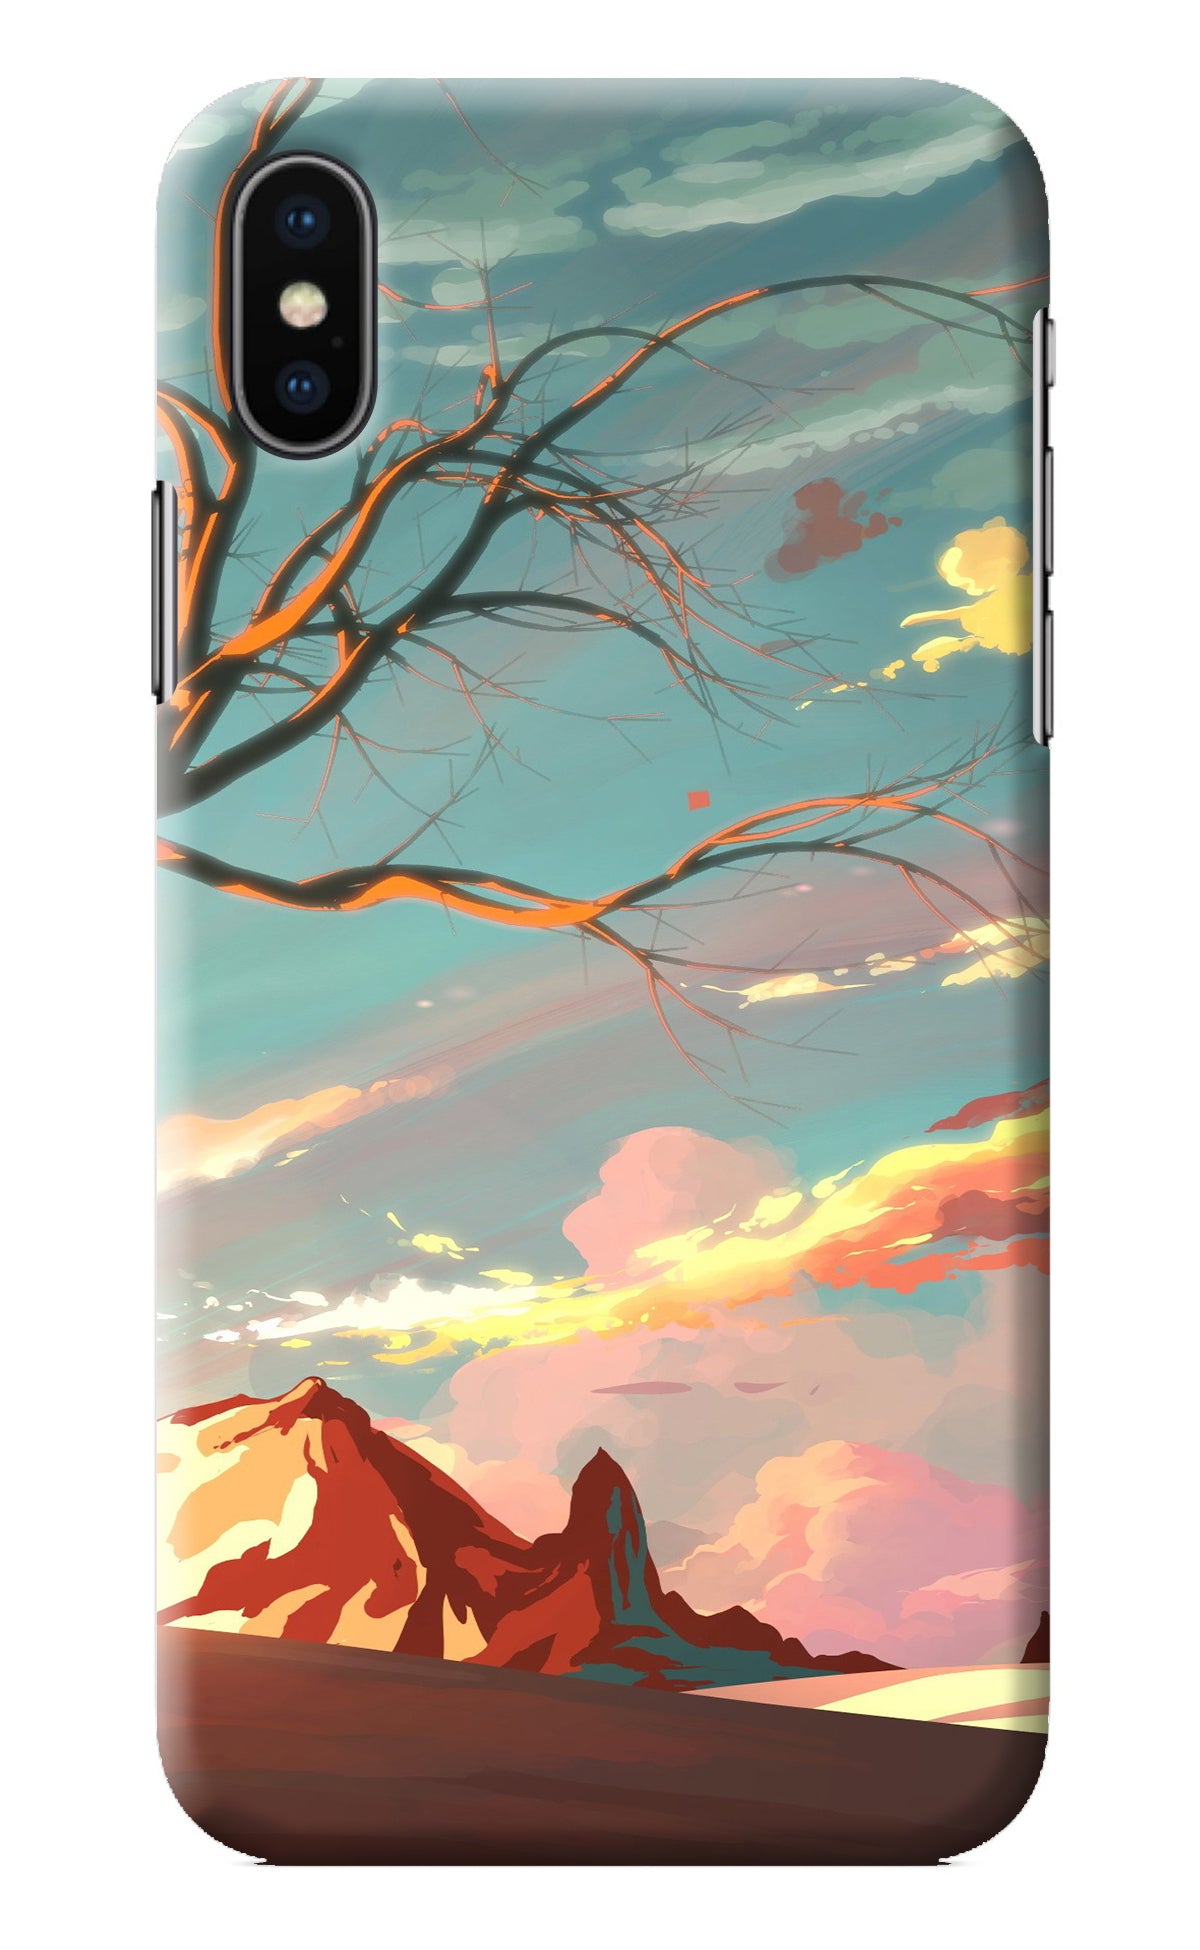 Scenery iPhone X Back Cover